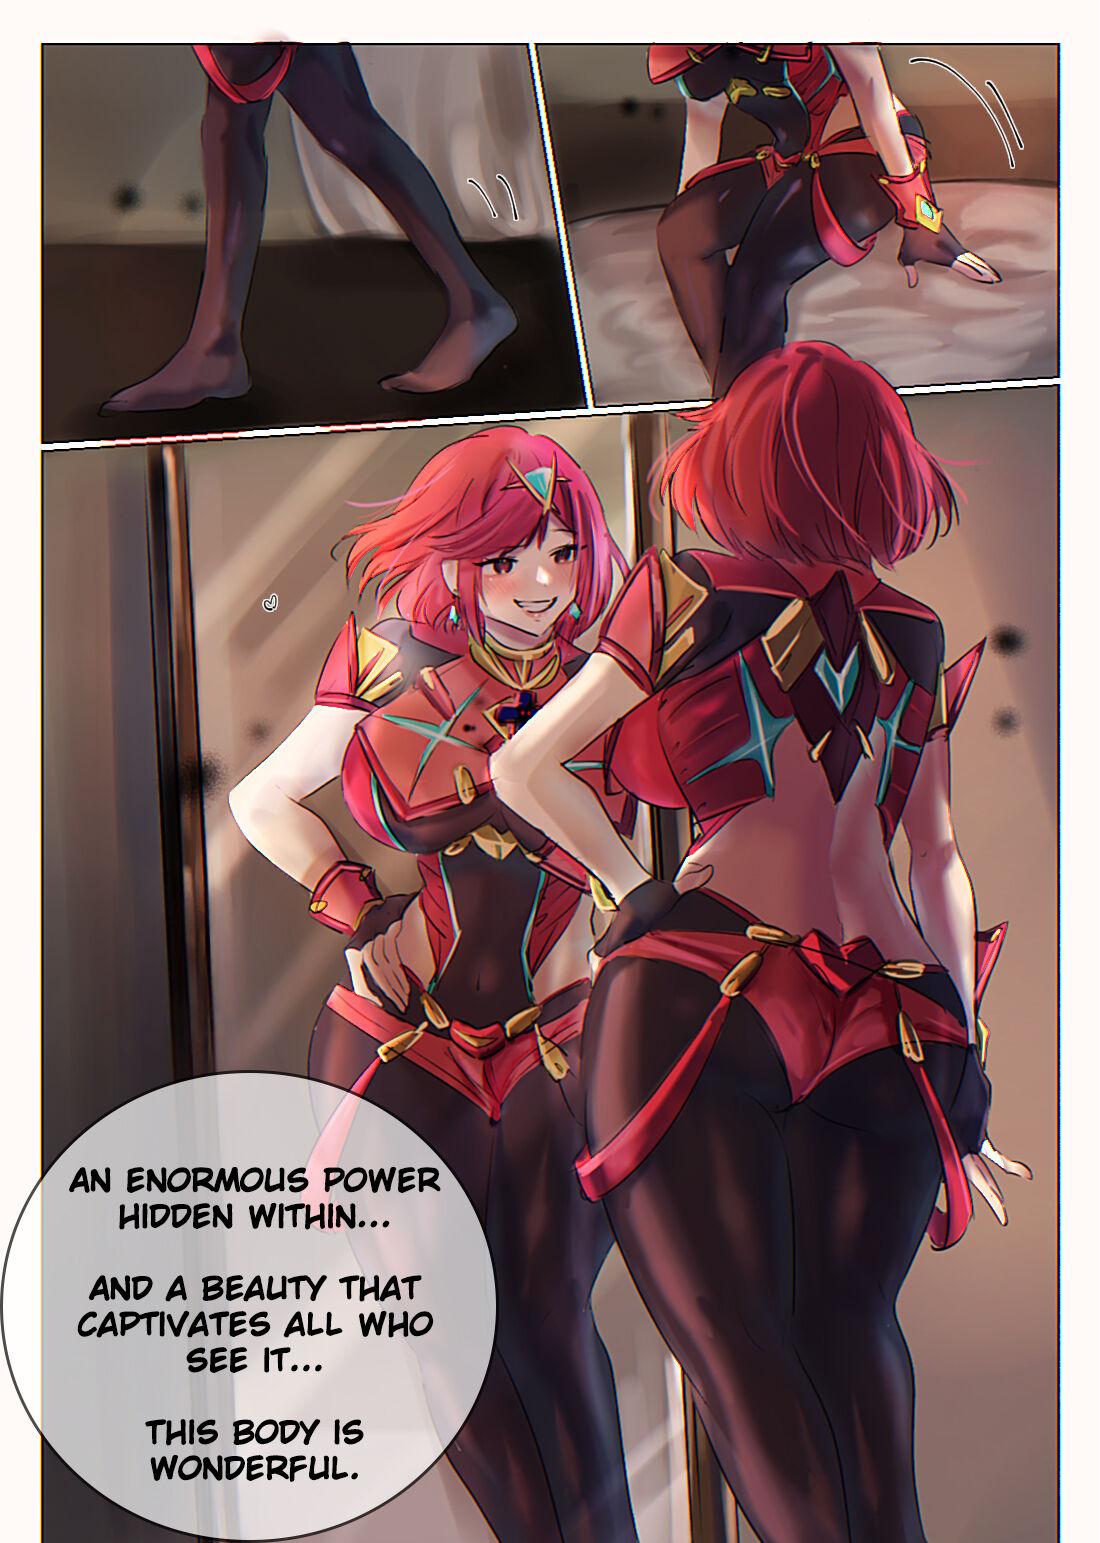 Fun Possessing Pyra and Mythra - Xenoblade chronicles 2 Home - Page 6